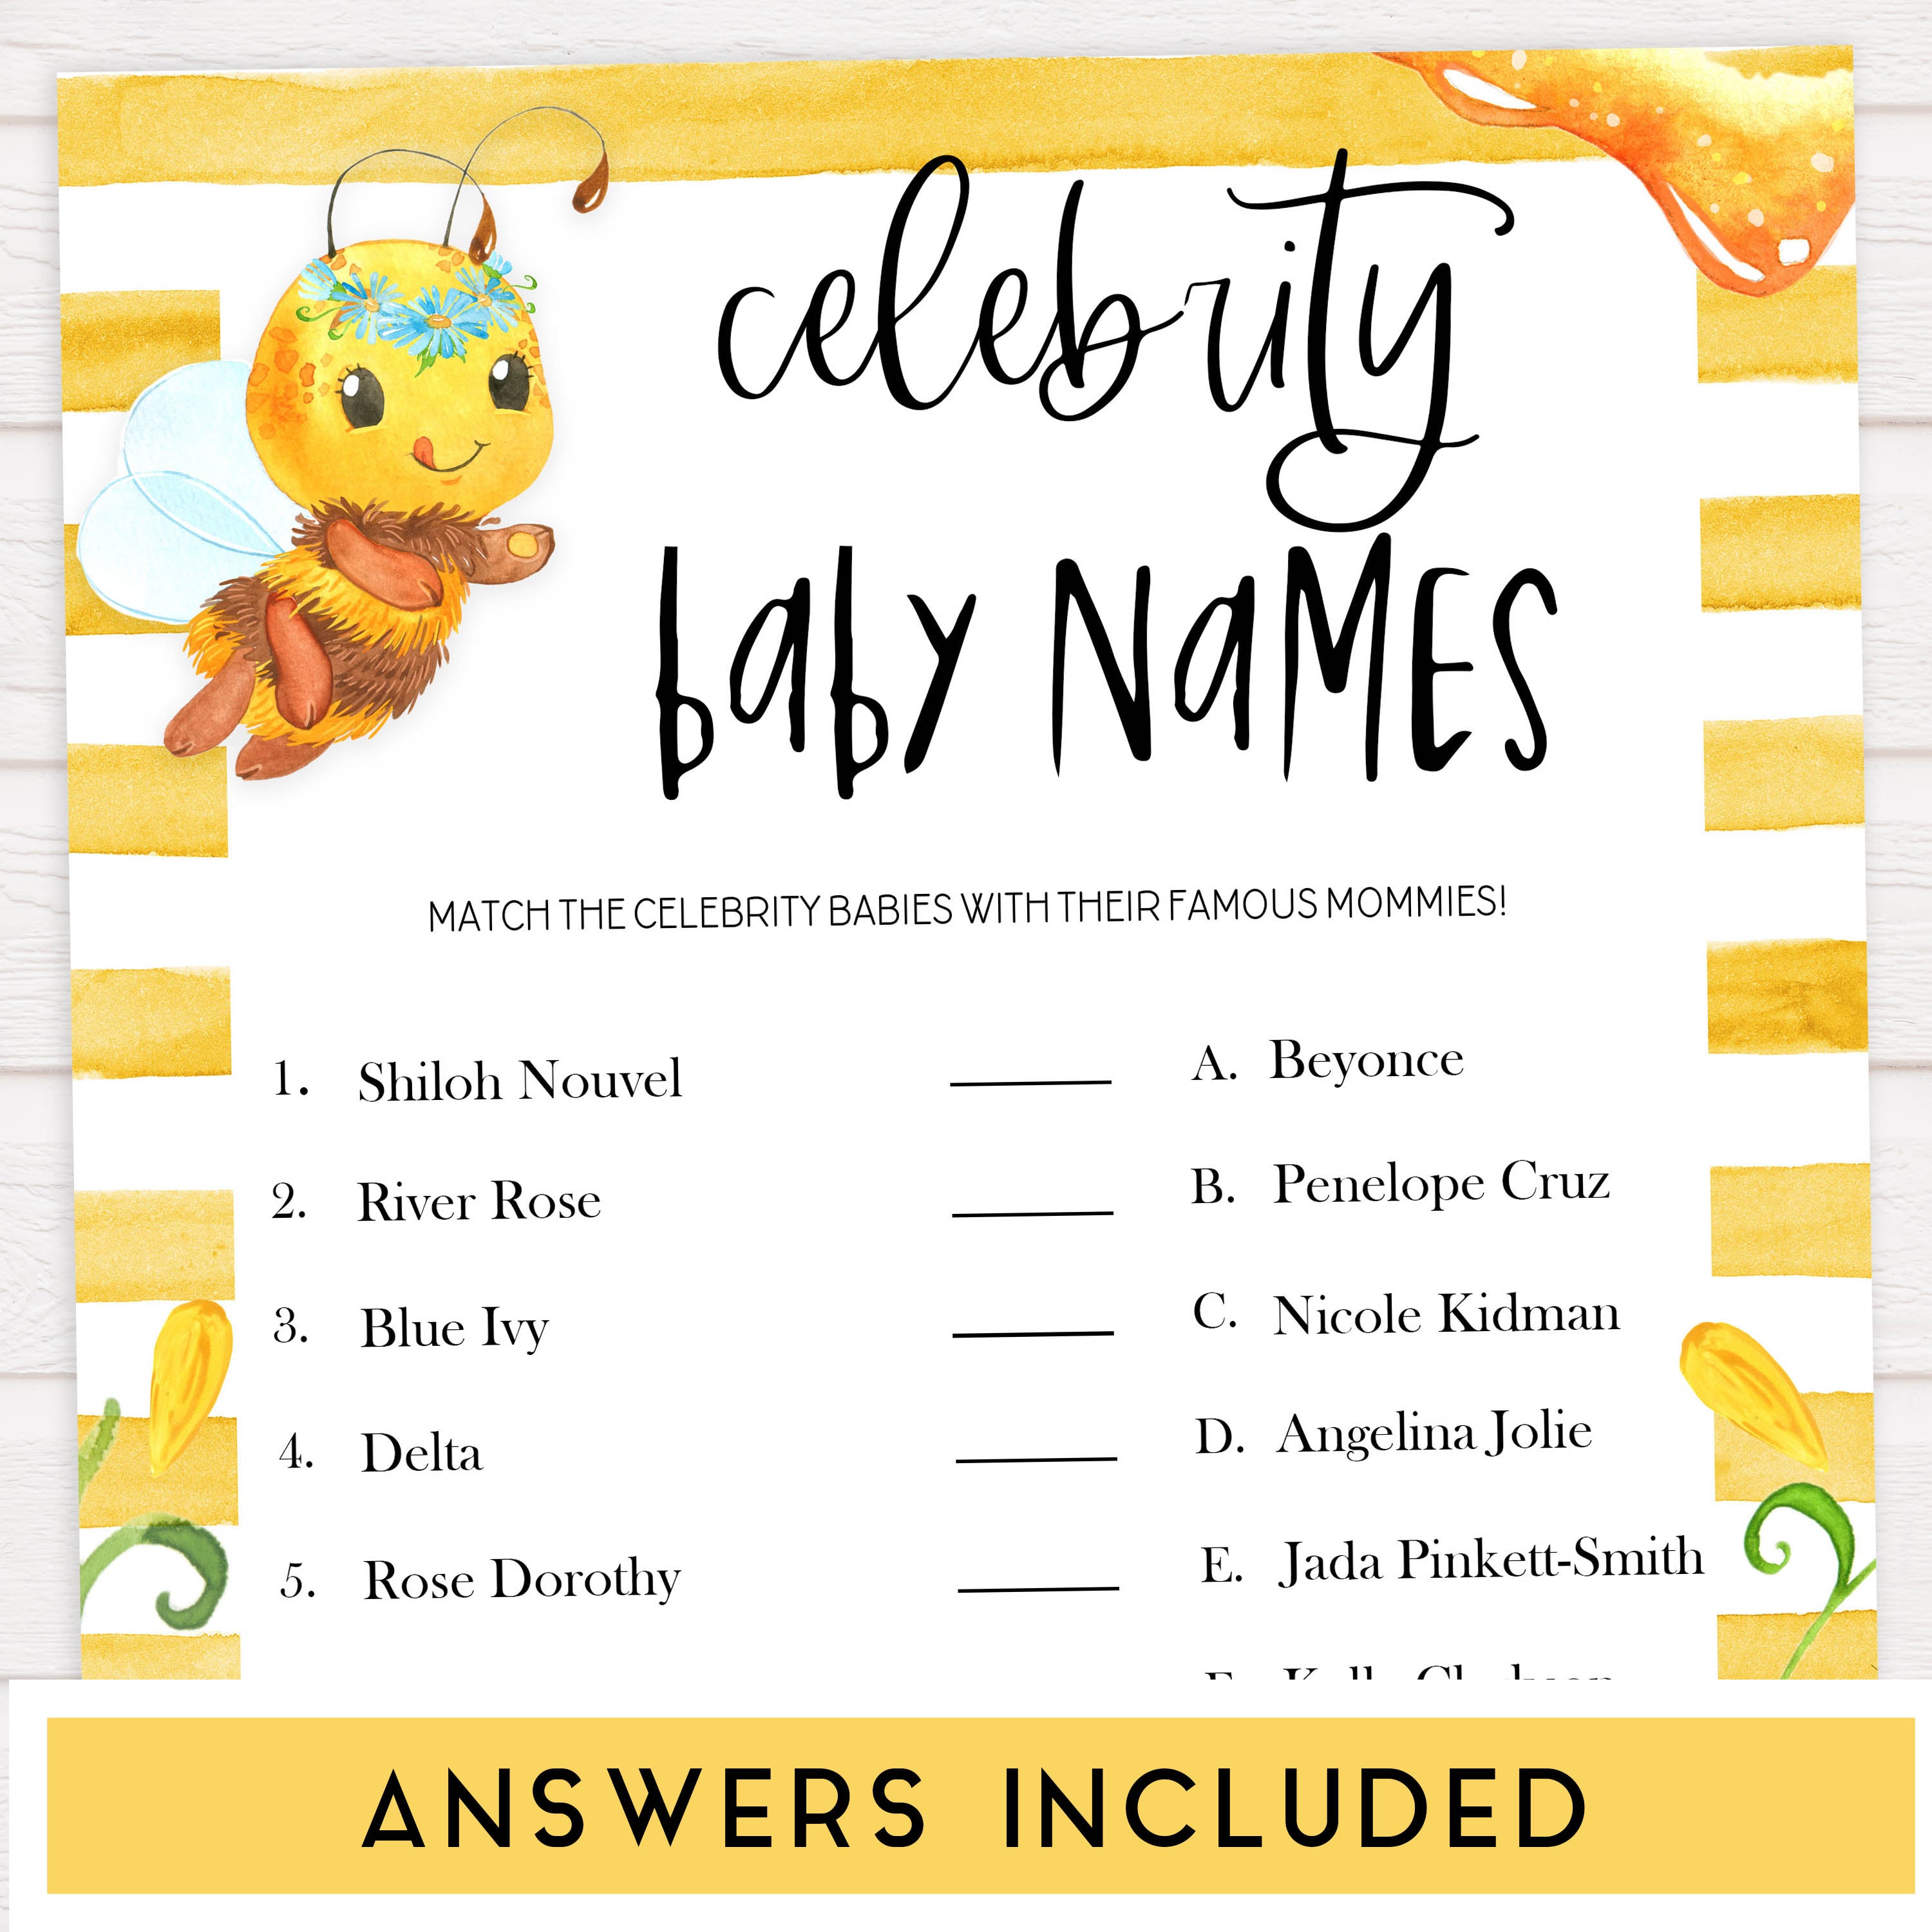 celebrity baby names game, Printable baby shower games, mommy bee fun baby games, baby shower games, fun baby shower ideas, top baby shower ideas, mommy to bee baby shower, friends baby shower ideas